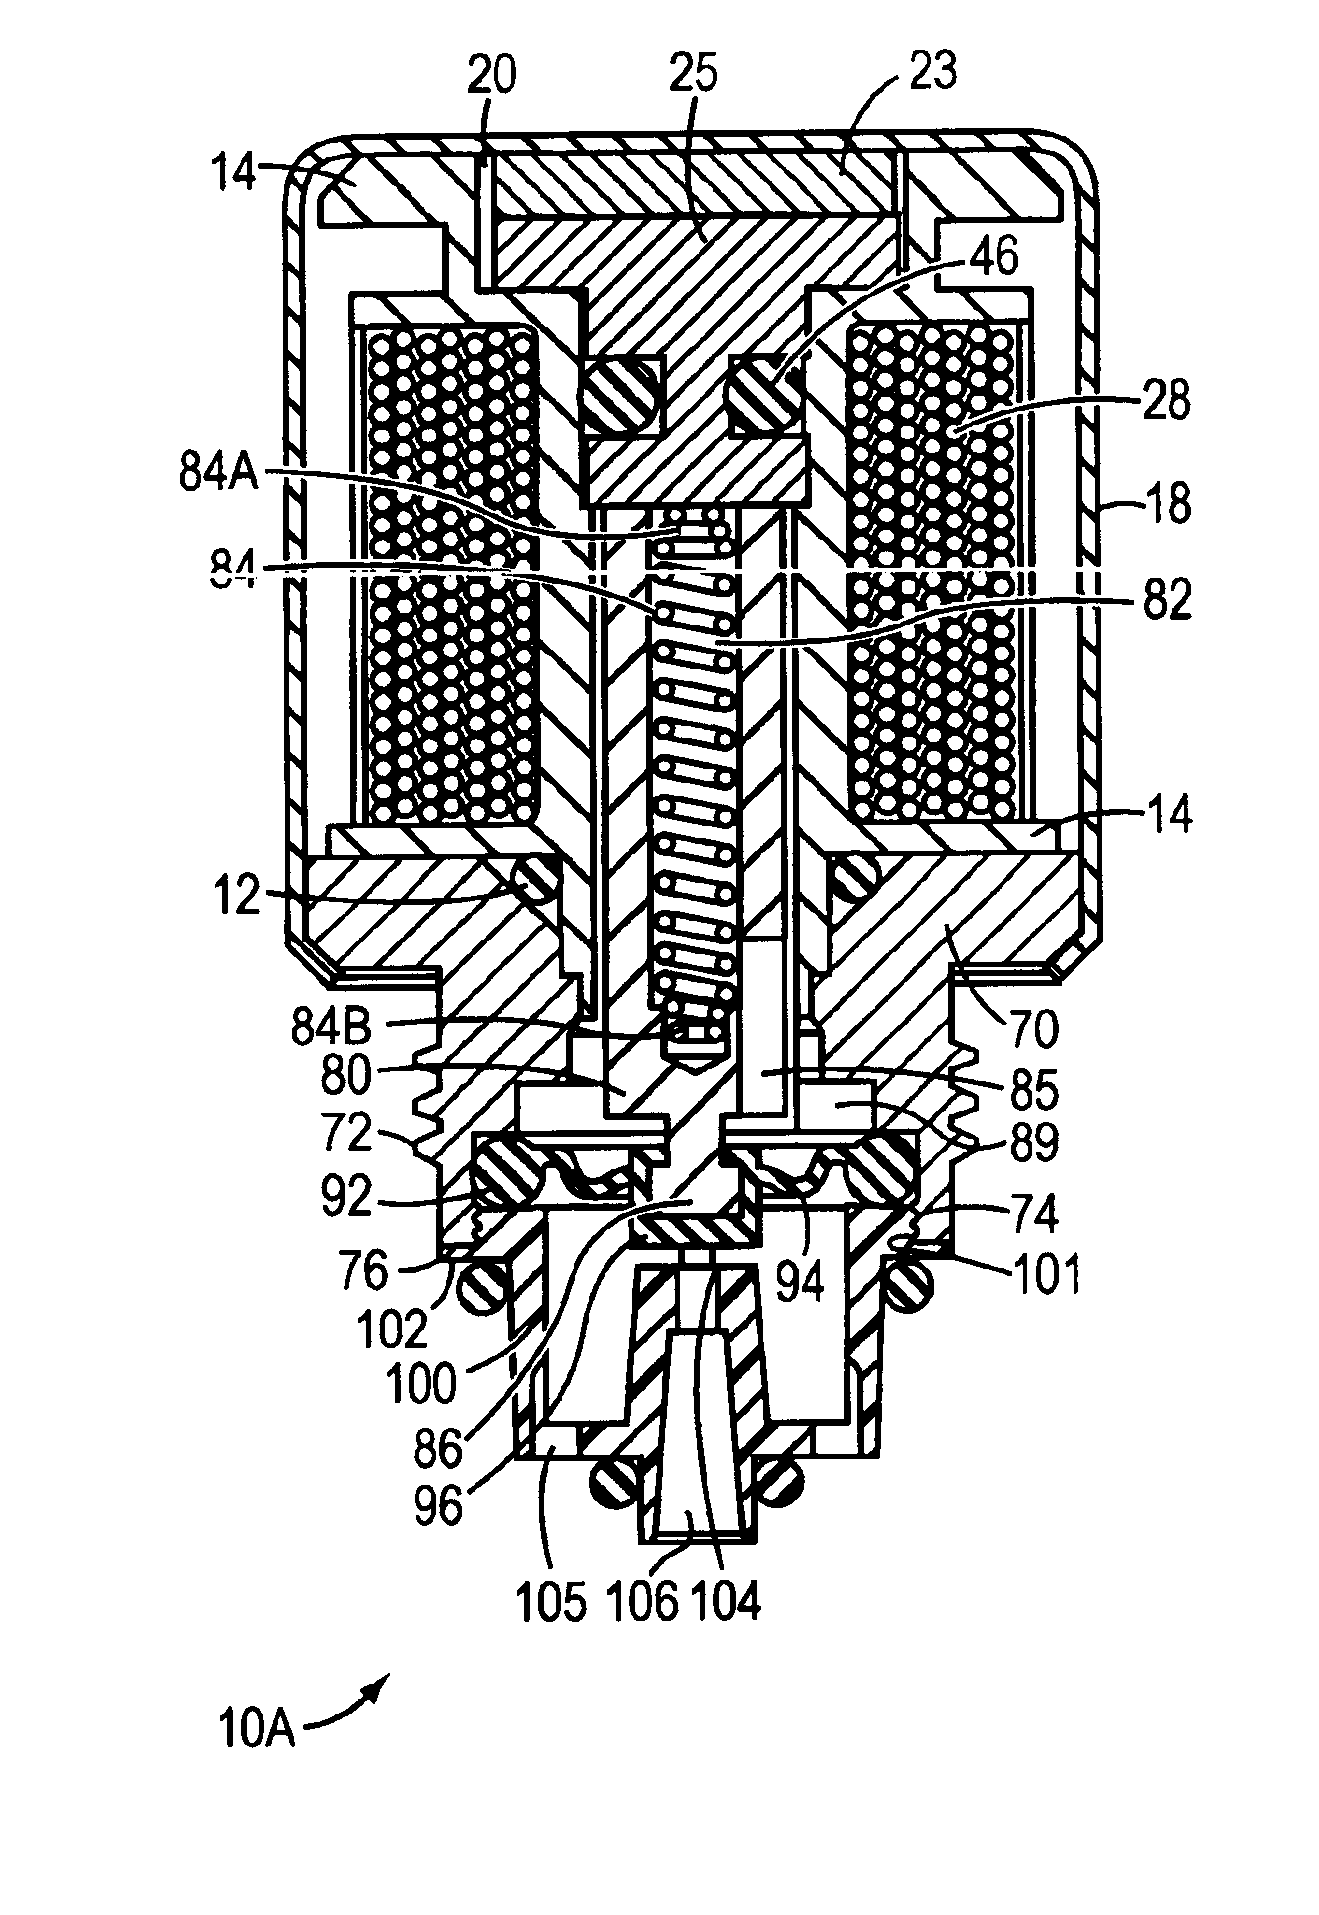 Apparatus and method for controlling fluid flow